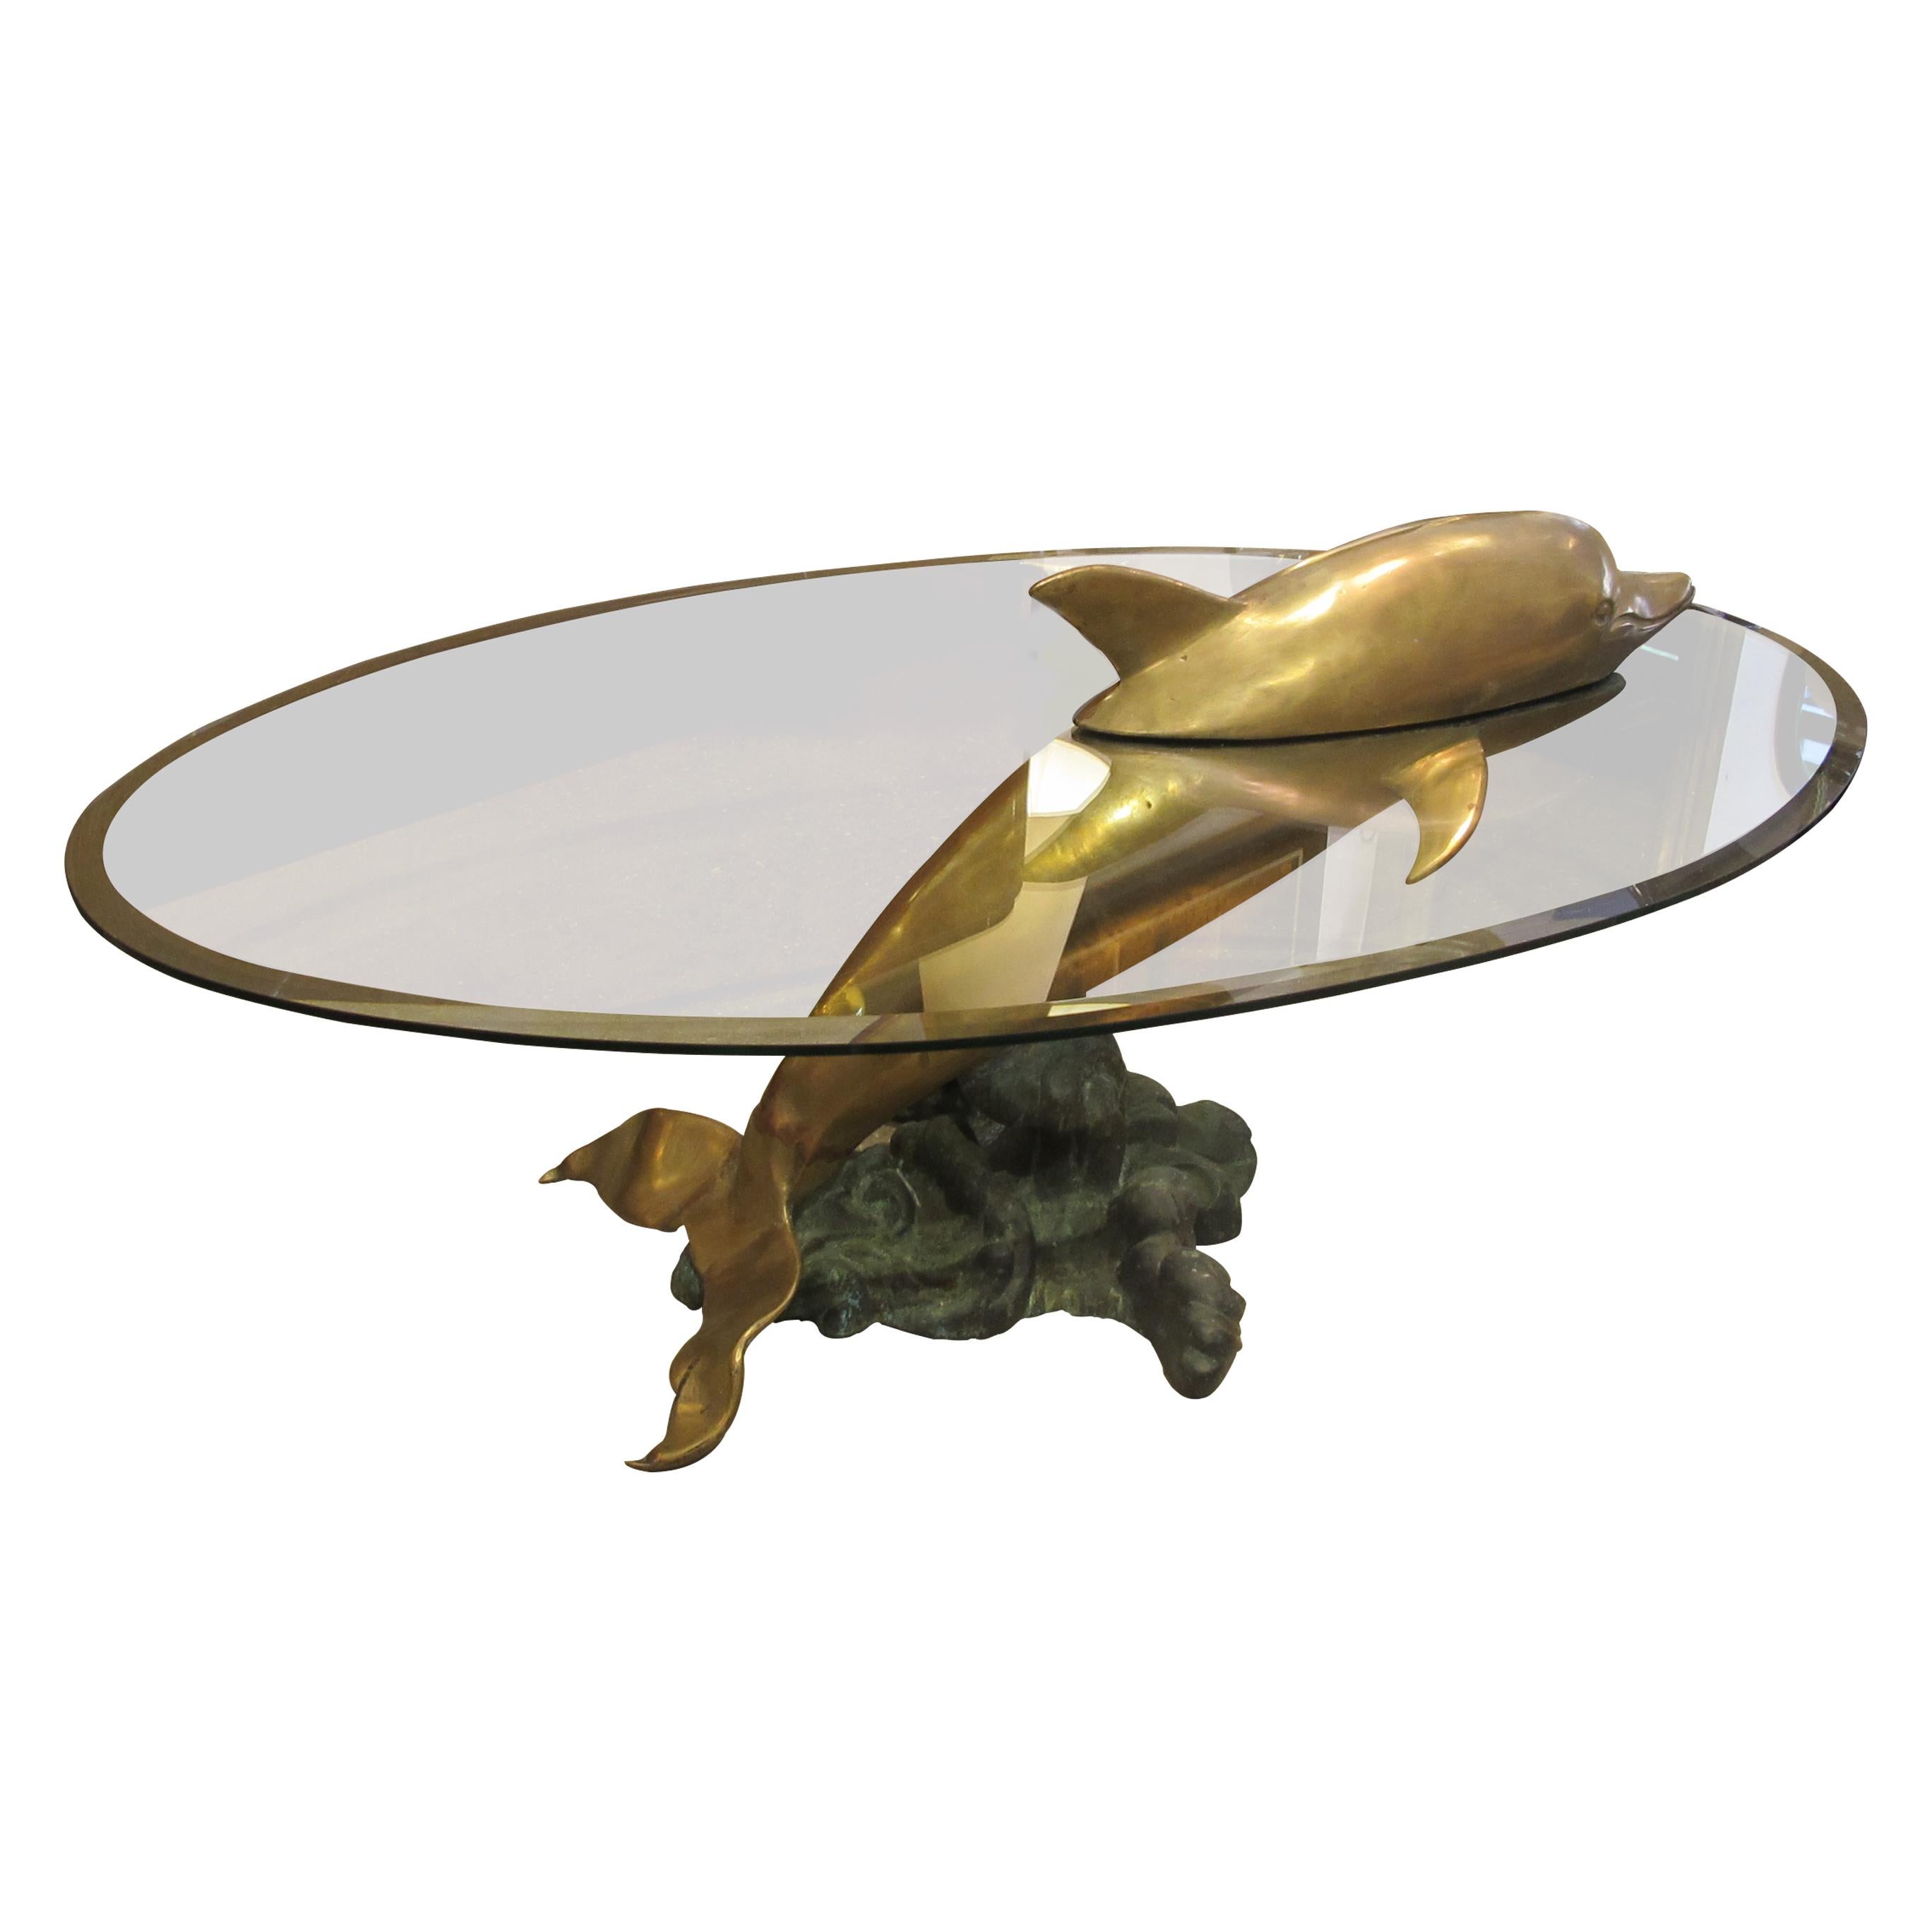 1960s coffee table with a brass dolphin sculpture bursting through the original oval bevelled glass top which effortlessly combines functionality and artistry. At the heart of this coffee table stands a meticulously crafted brass dolphin, skilfully